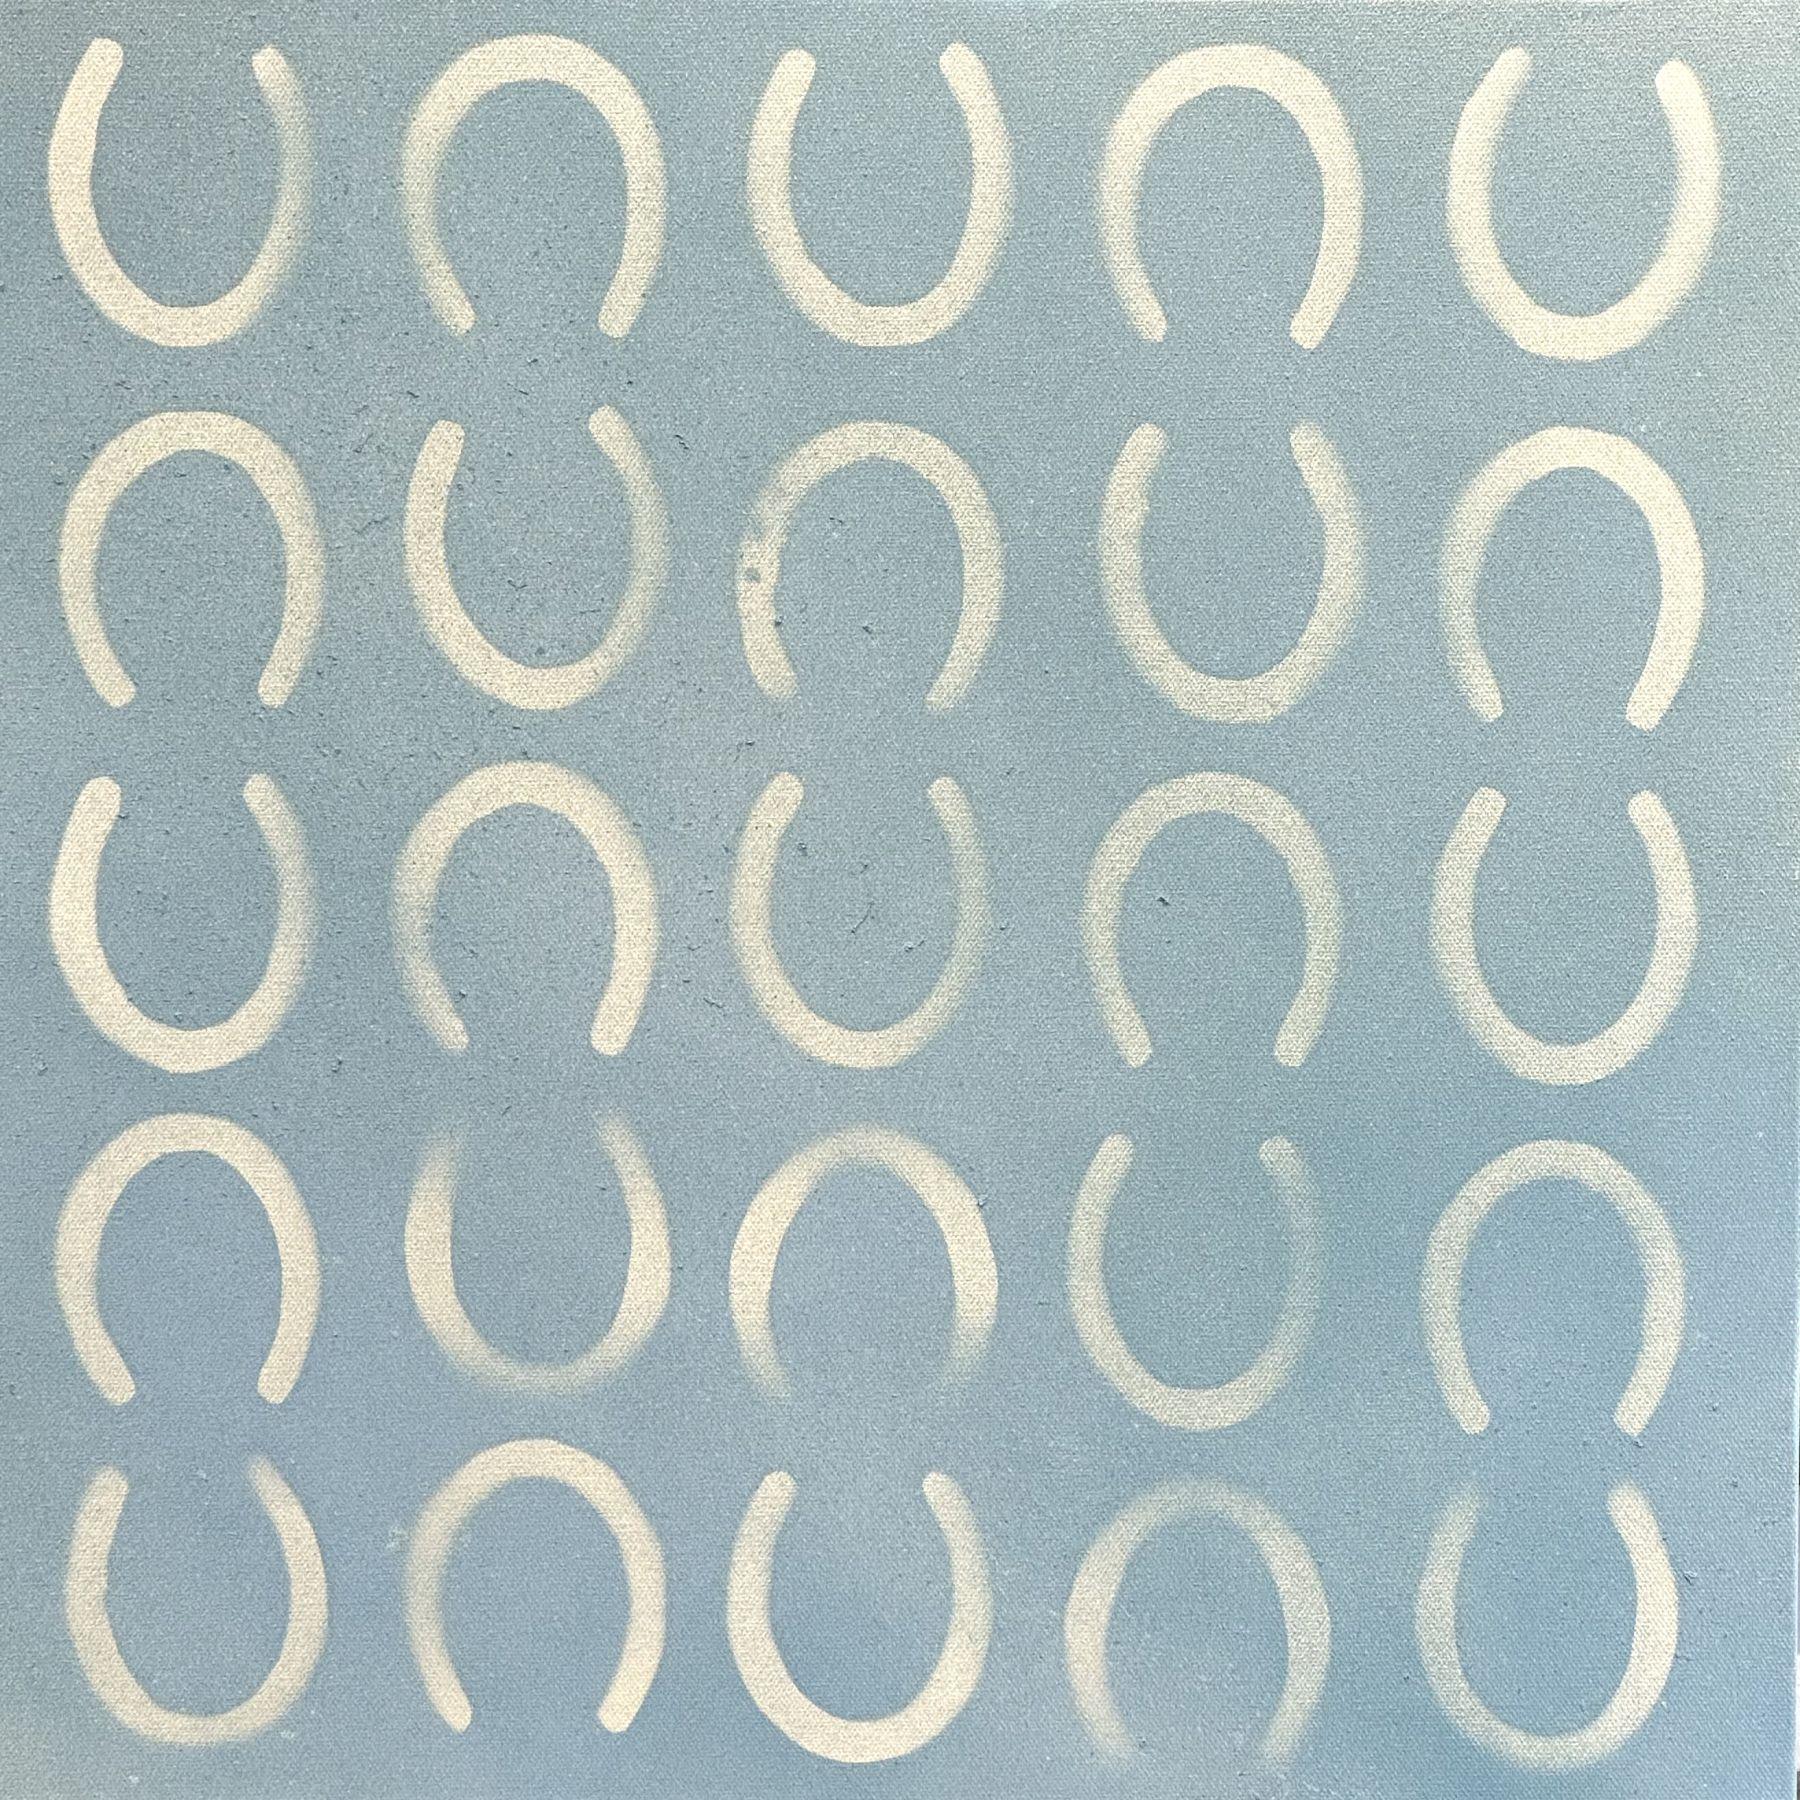 Matthew Jay Russell  Abstract Painting - Matthew Jay Russell, "Racing Feet I" 20x20 Abstract Horseshoe Painting on Canvas